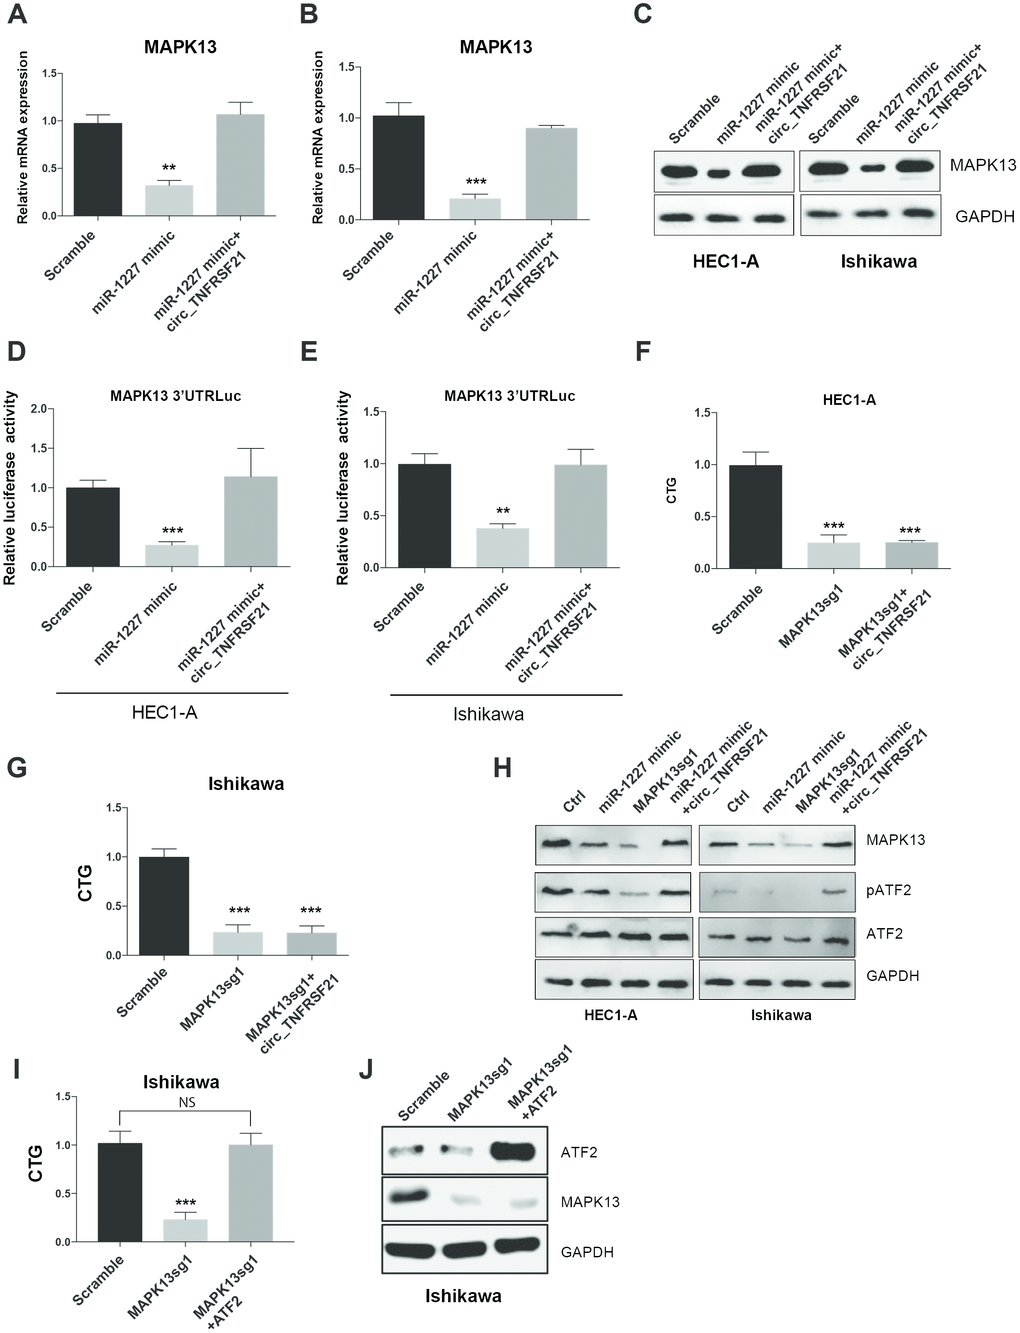 circTNFRSF21 rescues MAPK13-ATF2 signaling pathway by acting as miR-1227 sponge in EC cells. Detection of MAPK13 transcription (A, B) and protein level (C). (D, E) Luciferase assay detect MAPK13 3’UTR activity. (F, G) Cell growth detection after knocking down MAPK13 in the presence or absence or circTNFRSF21. (H) Western blot detects MAPK13, ATF2, phosphorylated ATF2 expression. GAPDH was used as internal control. (I) Cell growth detection after knocking down MAPK13 in the presence or absence or ATF2. (J) Western blot detects MAPK13, ATF2 expression, GAPDH was used as internal control. *P